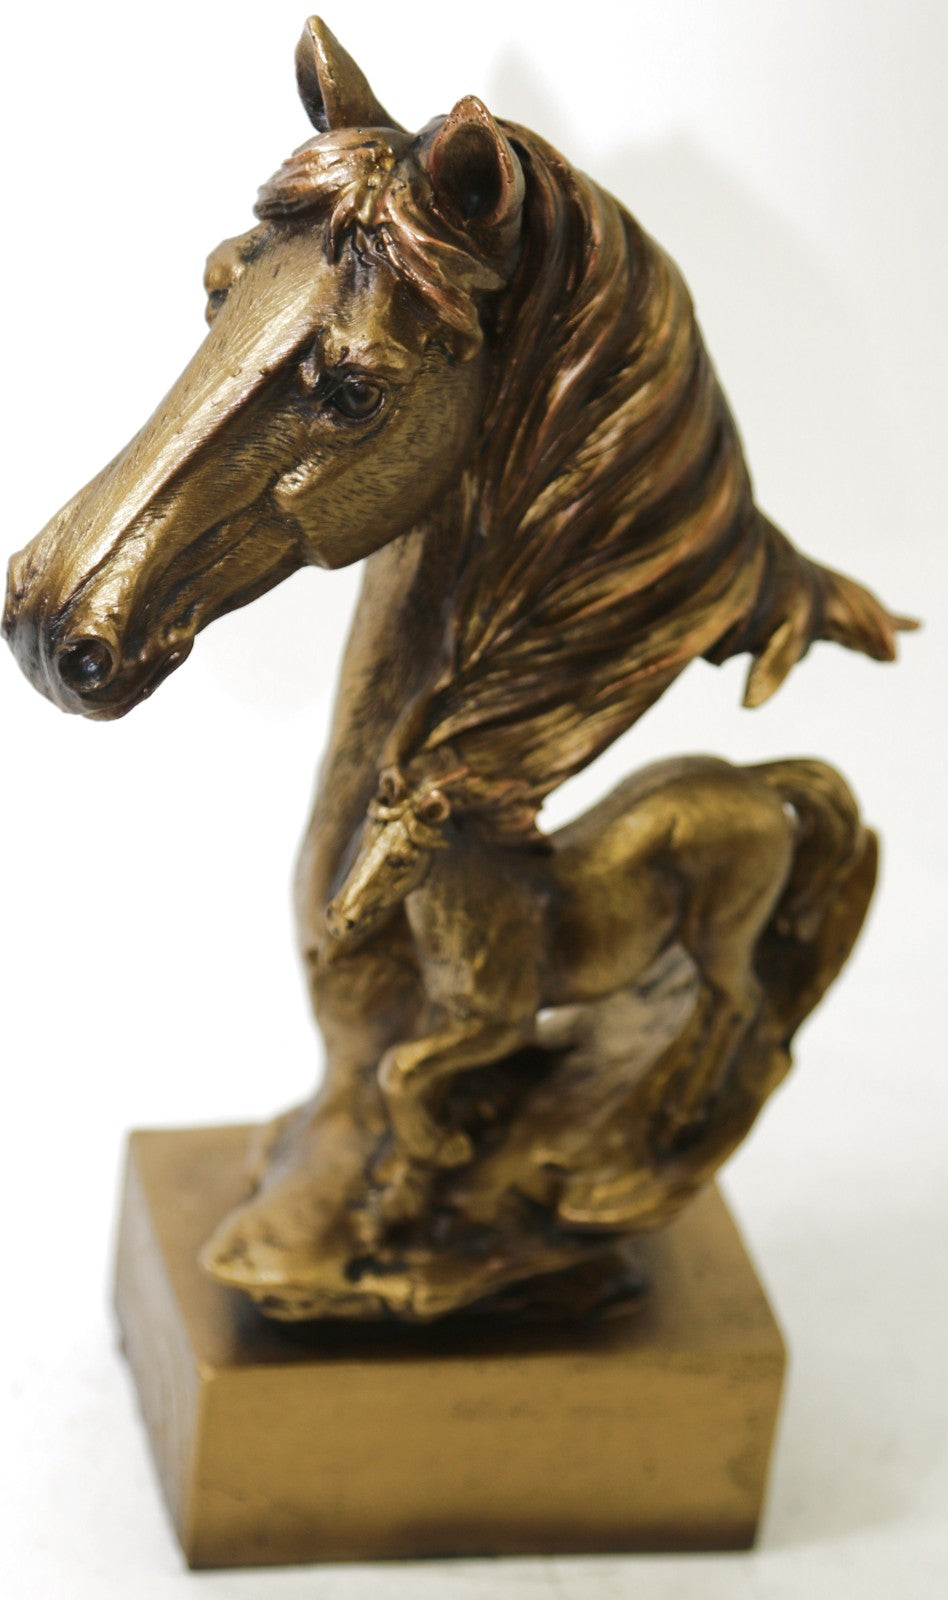 Galloping Western Stallions 15" Tall Table Sculpture Bronzed Statue Figurine